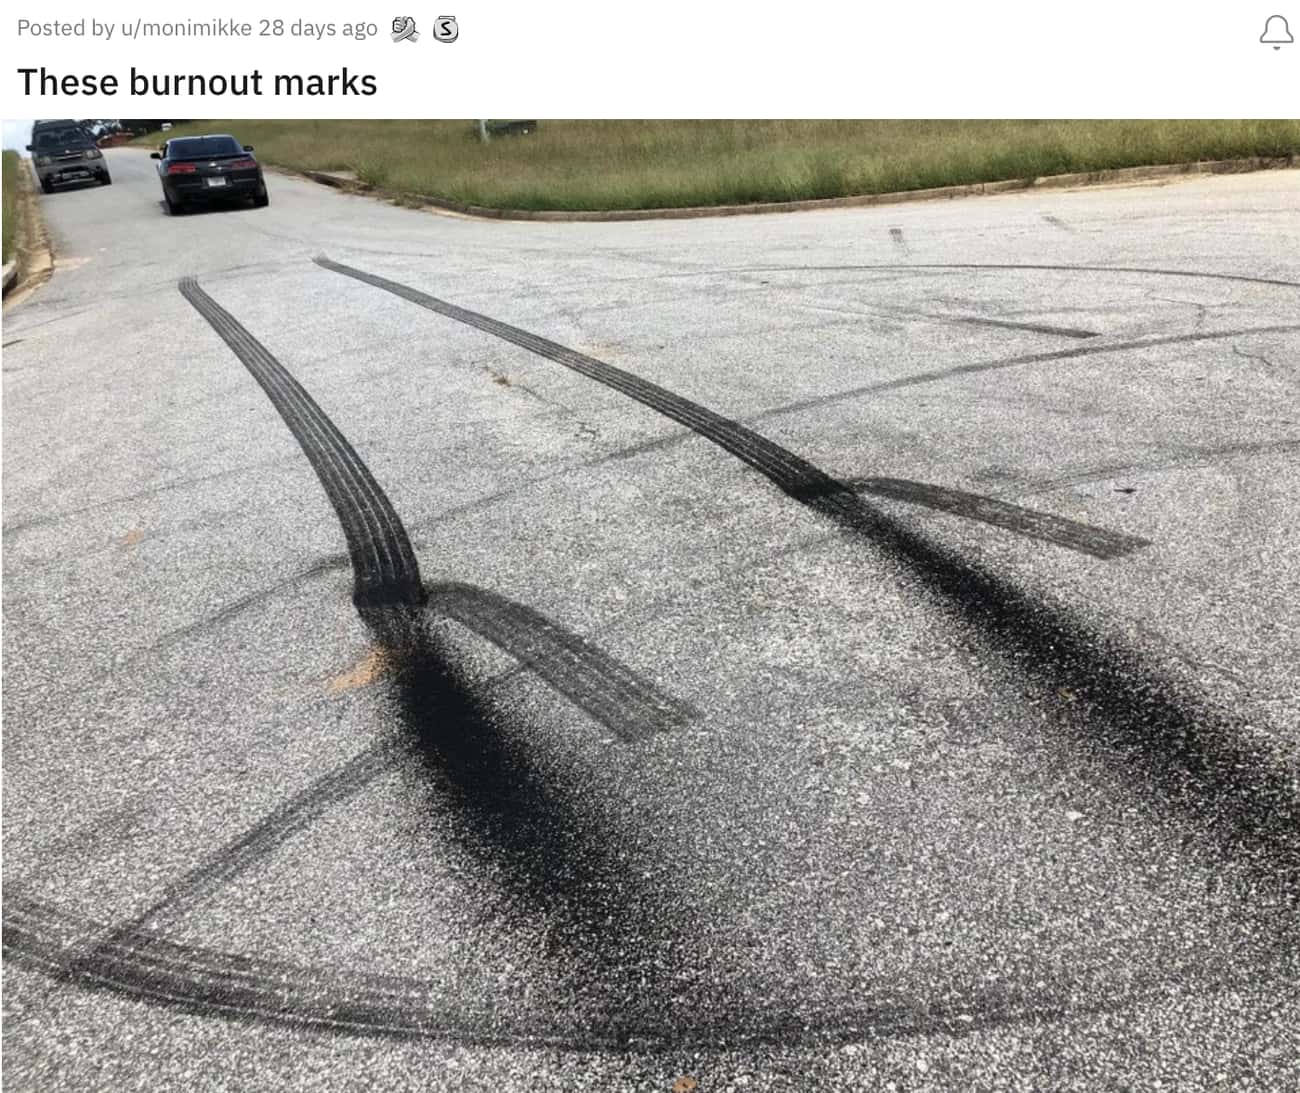 The Burnout Marks Give A 3D Illusion